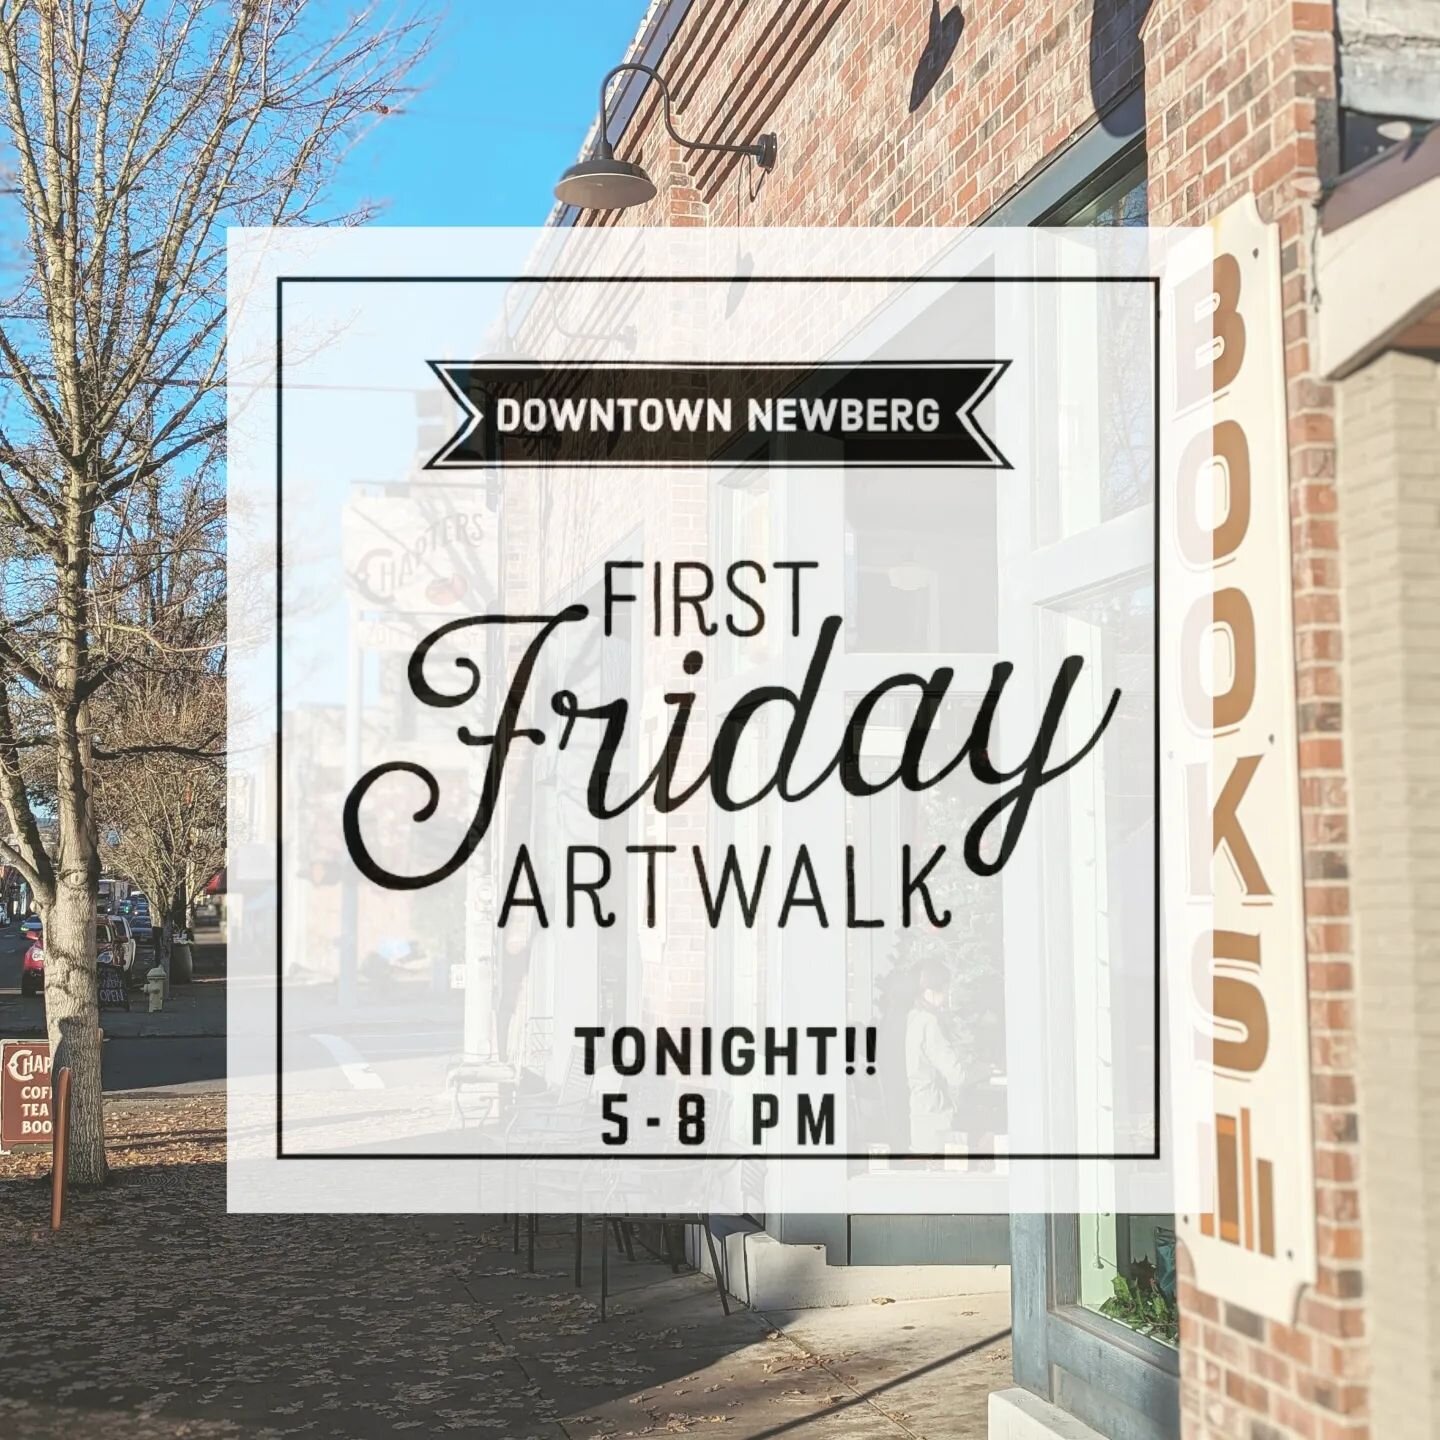 Tonight is @newberg_art_walk First Friday! We will have local author C.T. Carey signing books and @fireflyavenuestudio showing her beautiful work. Looks like it'll be a perfect evening to get out and walk around town to check out all the fun! 

#down